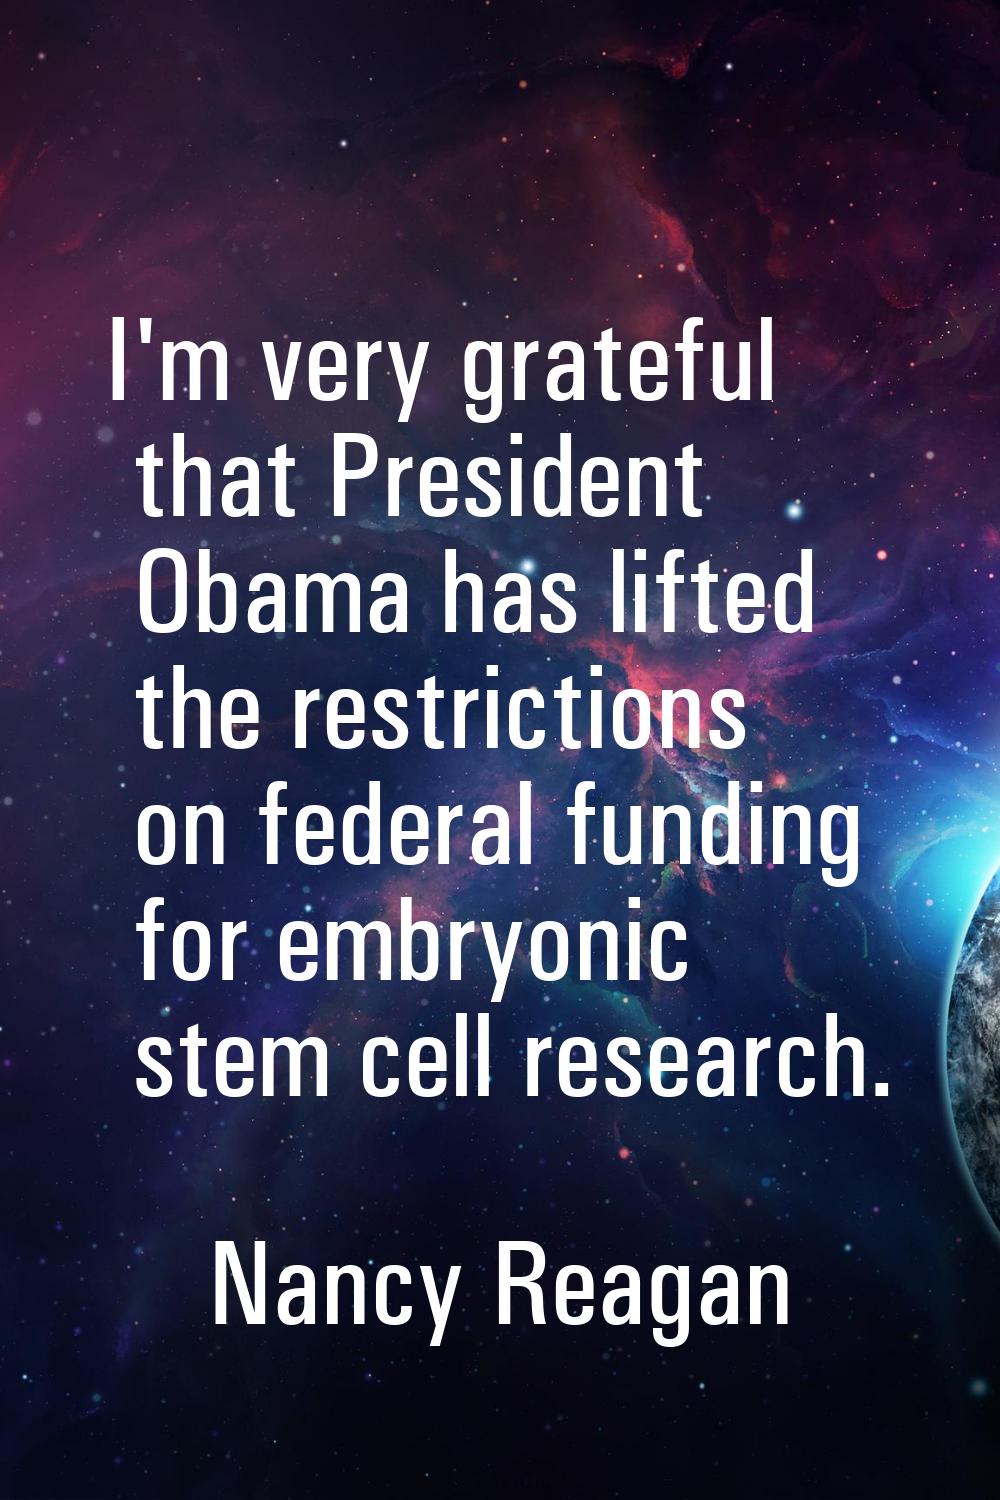 I'm very grateful that President Obama has lifted the restrictions on federal funding for embryonic